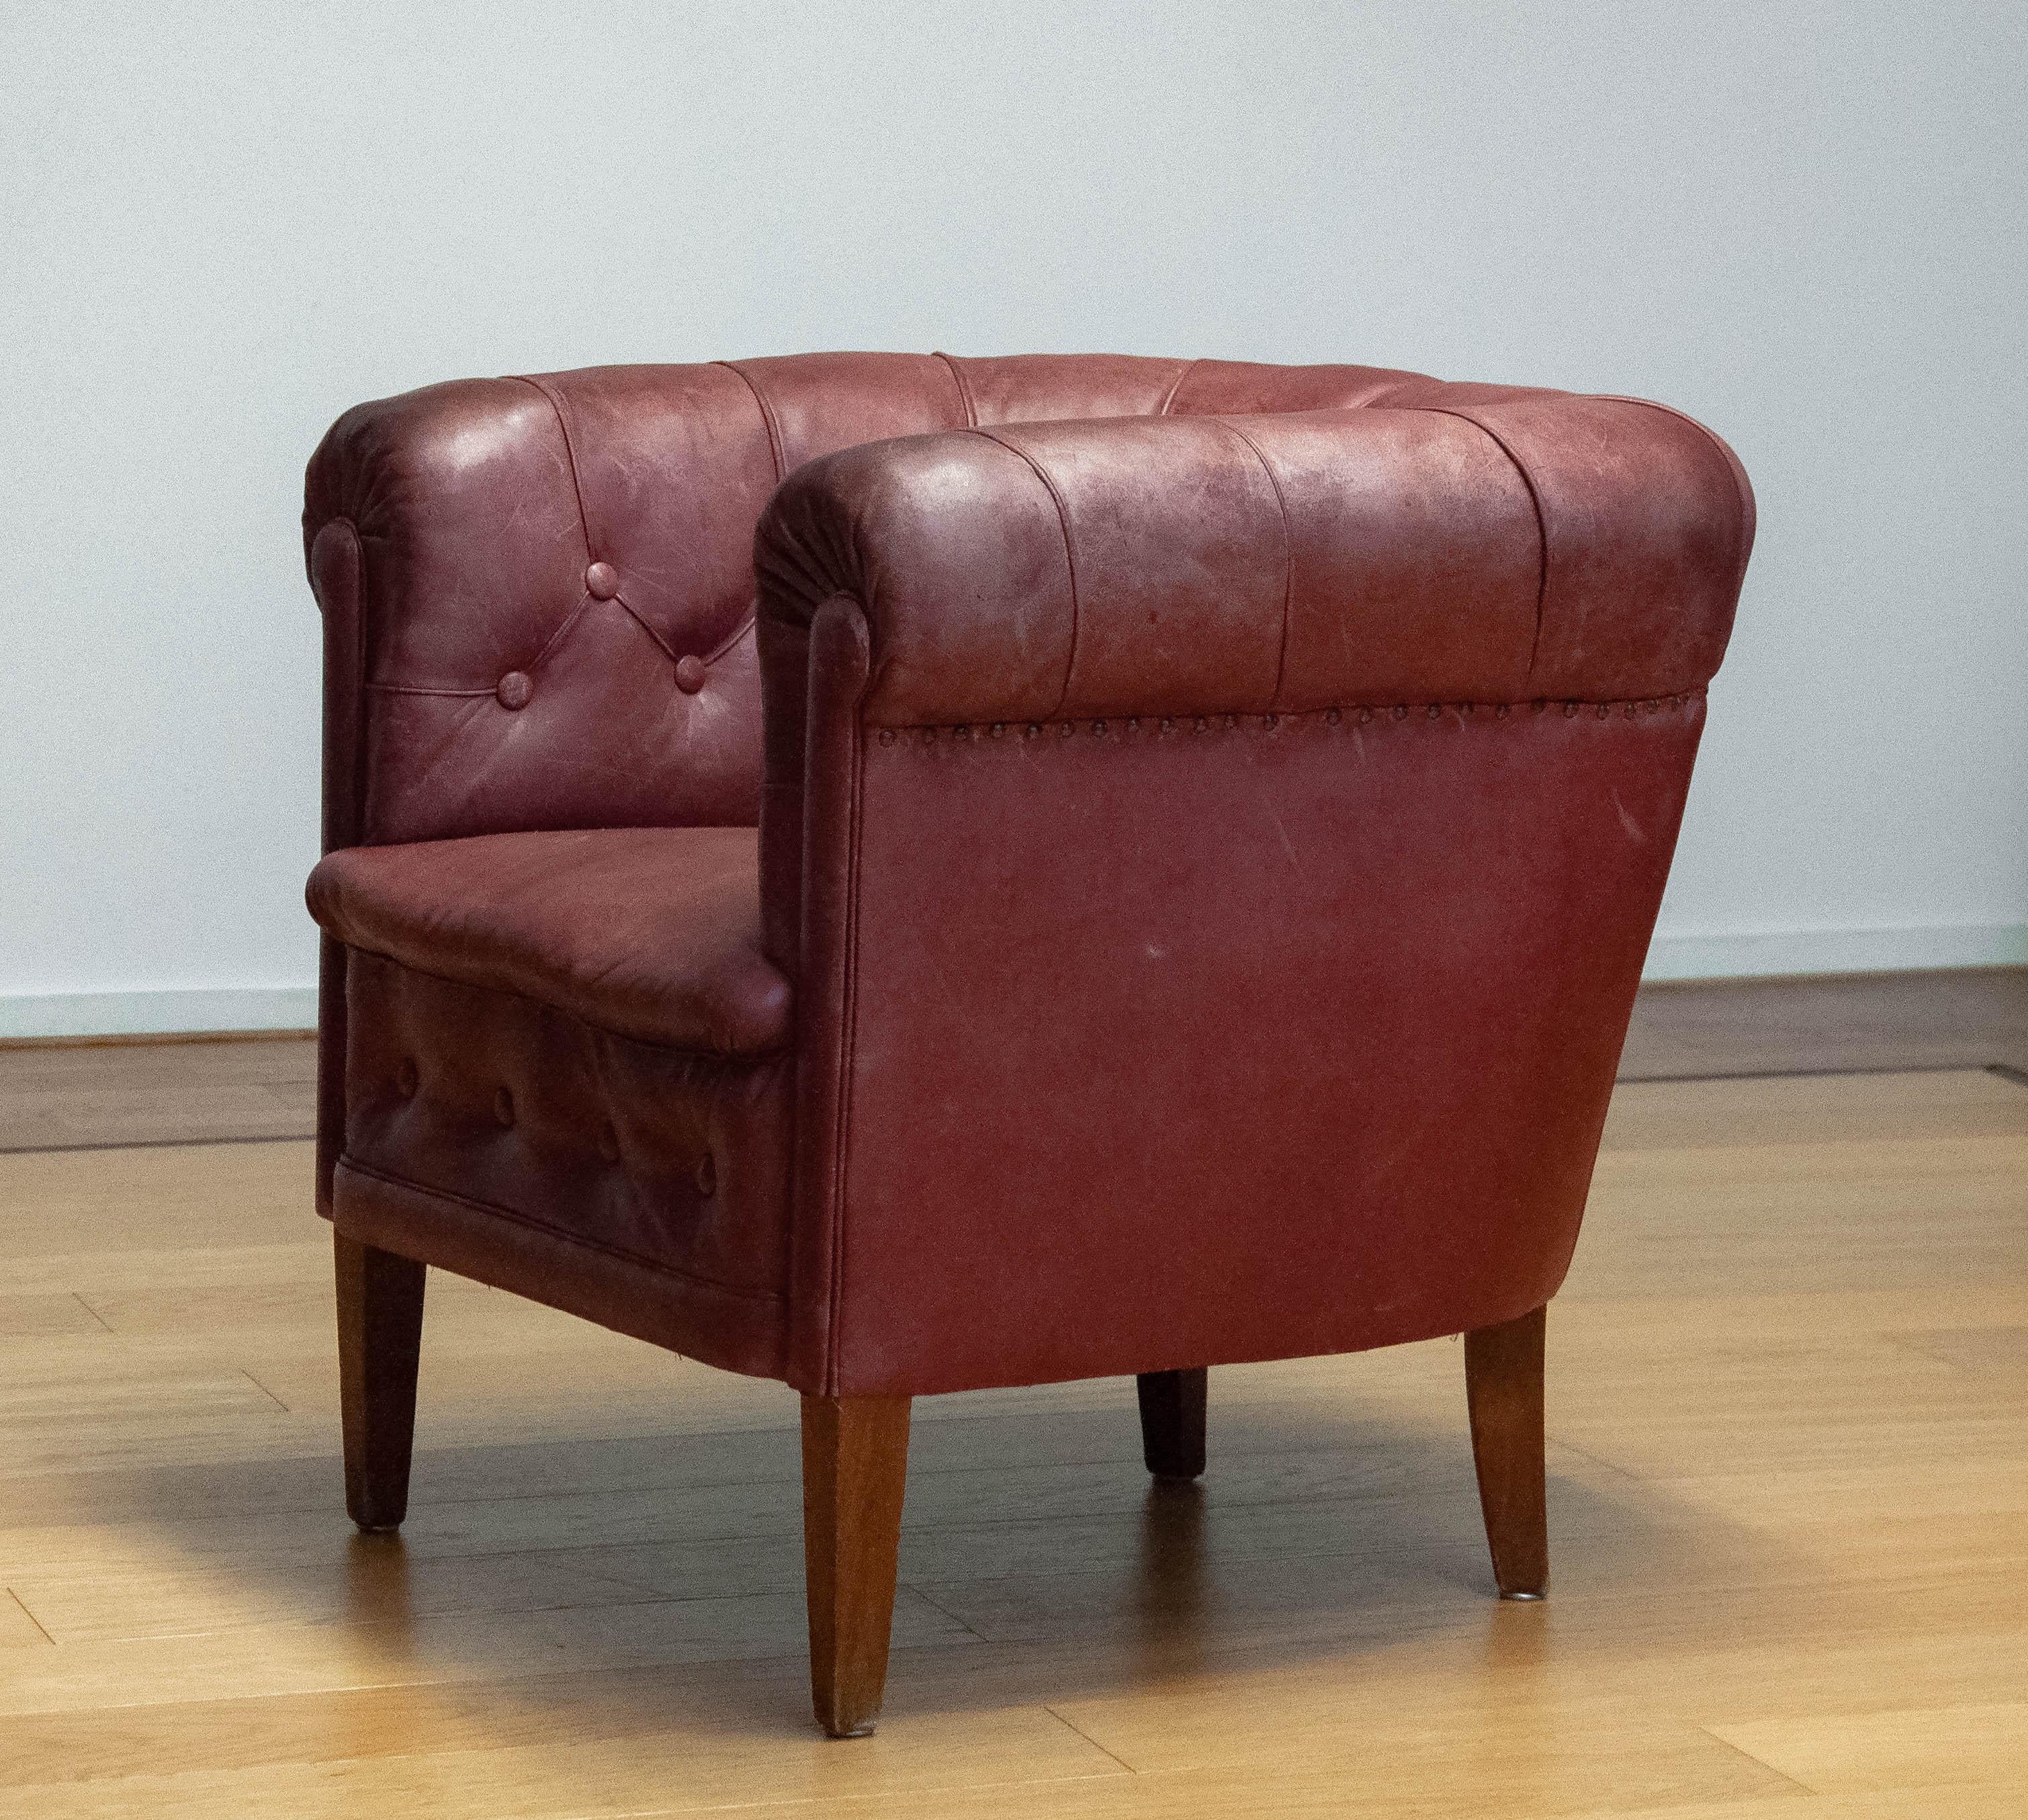 Mid-20th Century 1930s Swedish Crimson Red Chesterfield Club Chair in Patinated Leather For Sale